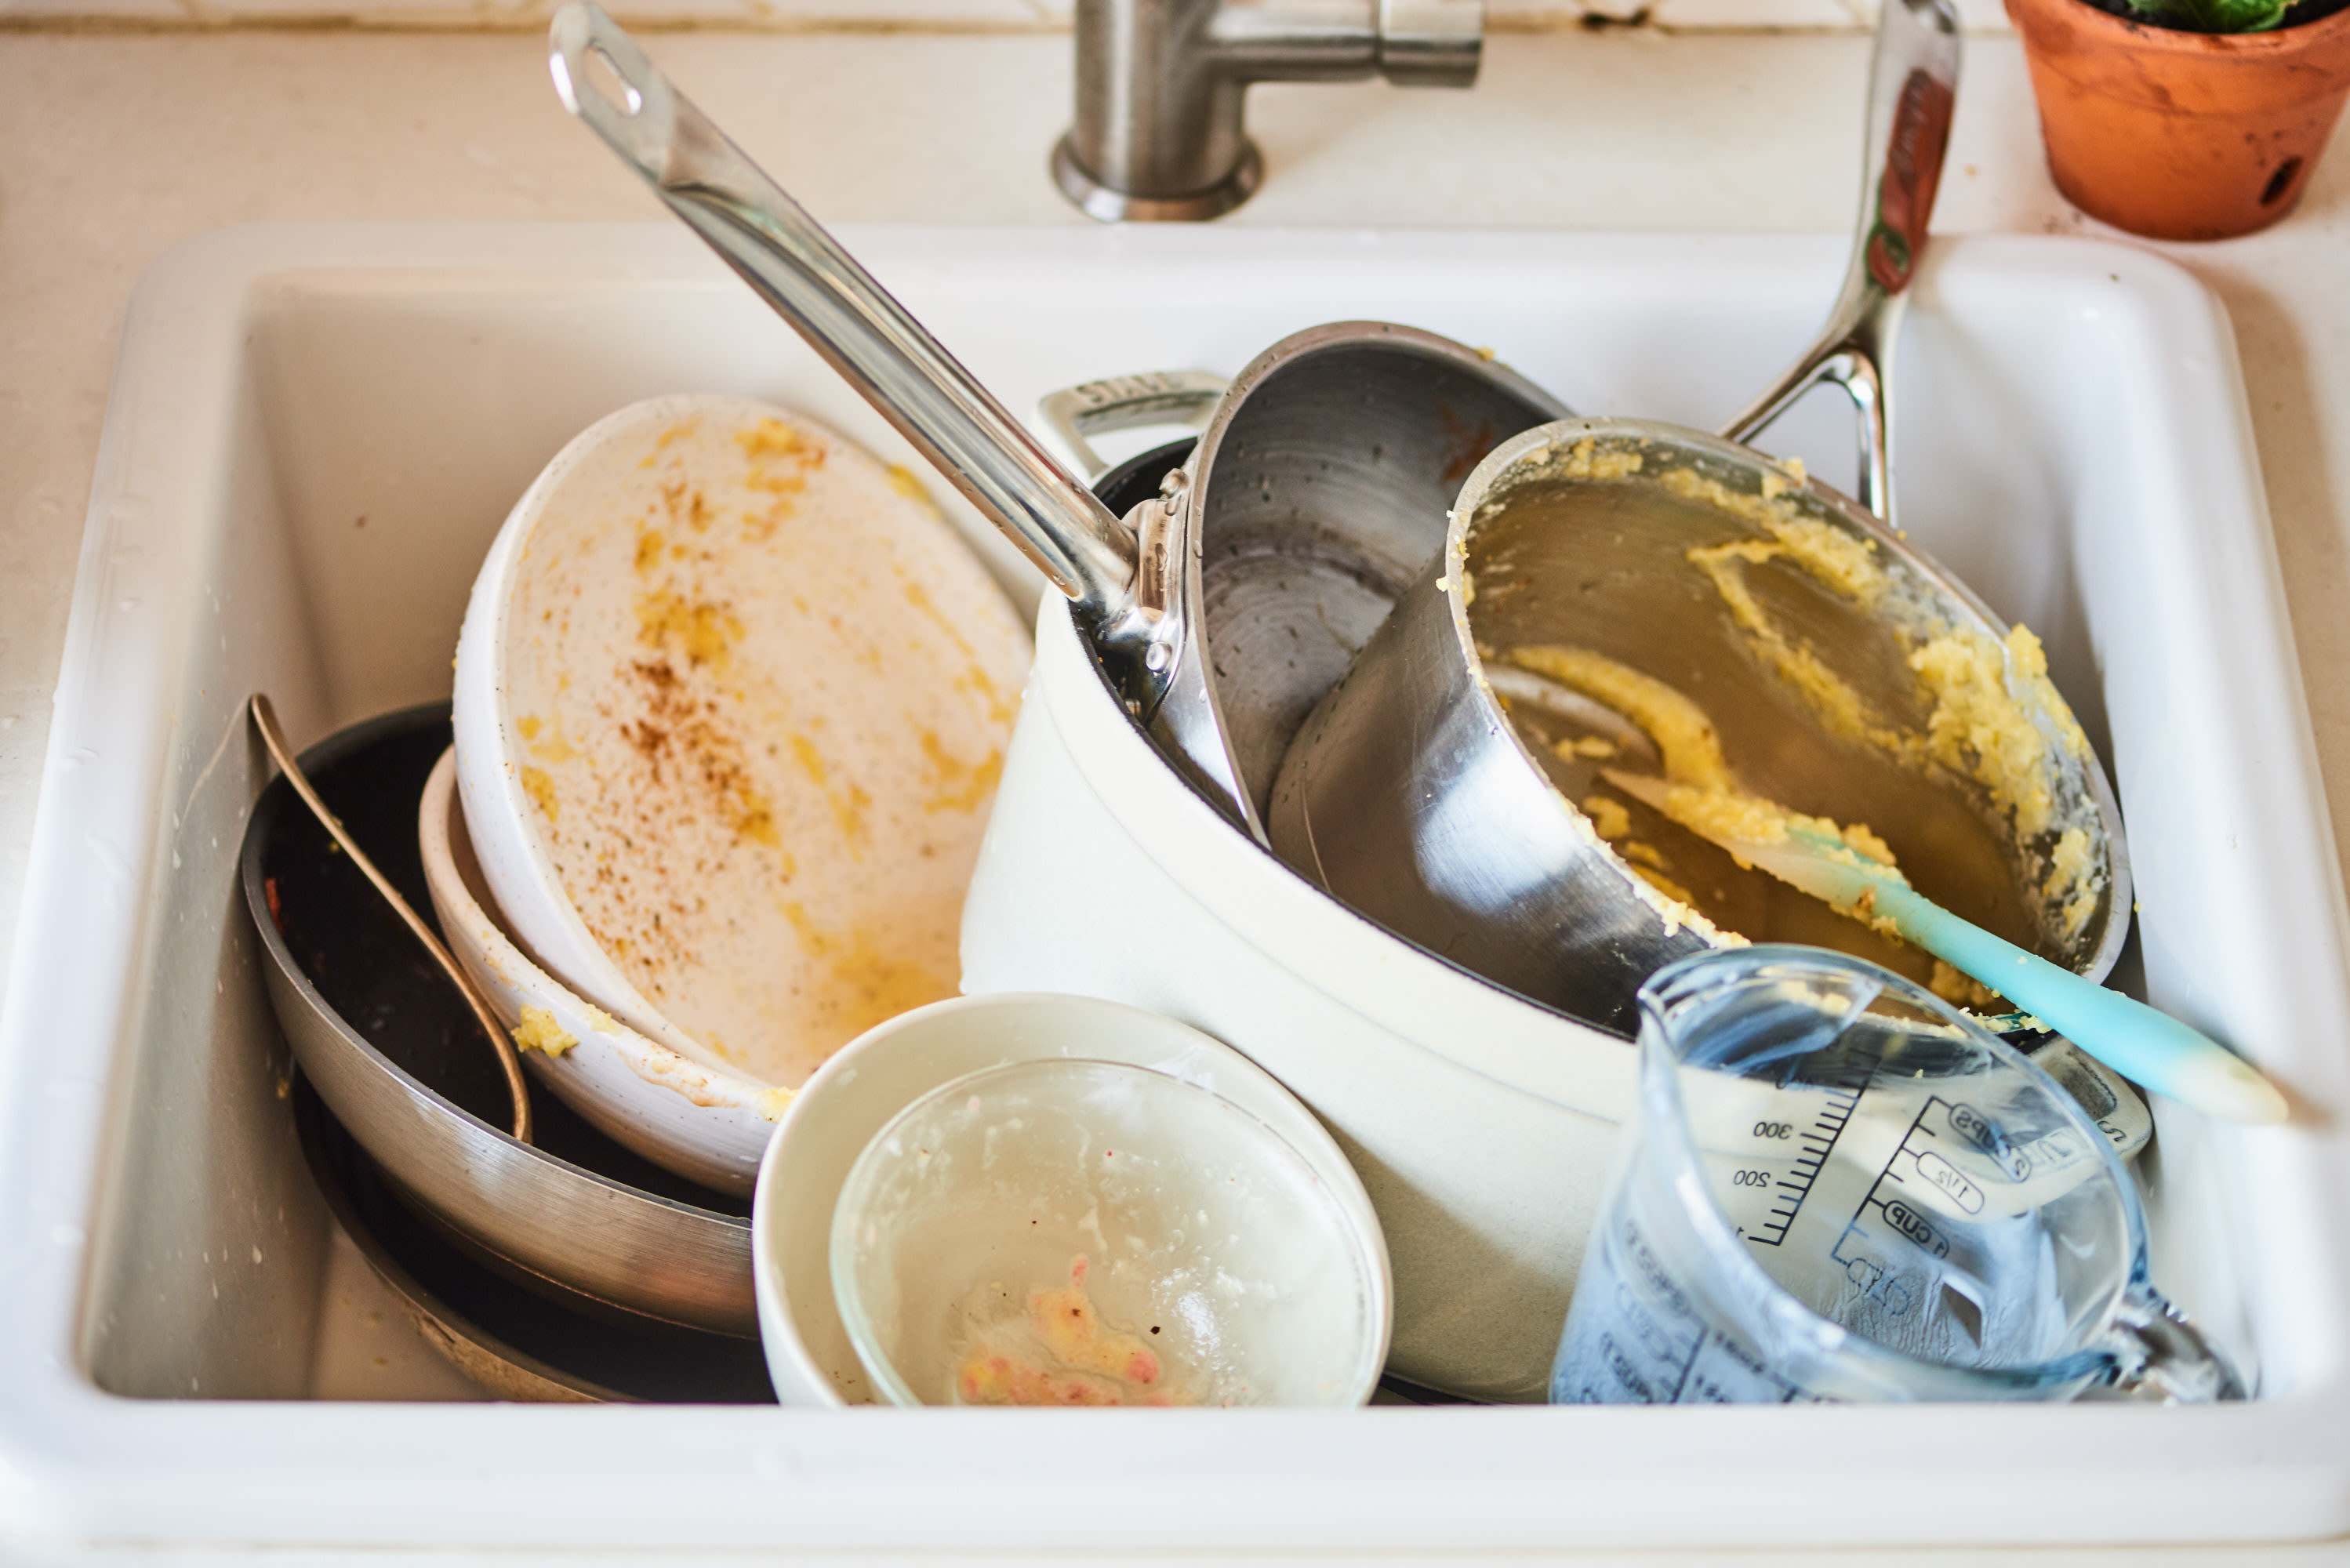 https://cdn.apartmenttherapy.info/image/upload/v1565275640/k/Photo/Lifestyle/2019-08-cleaning-every-pot-and-pan/Dirty-Pans_090.jpg